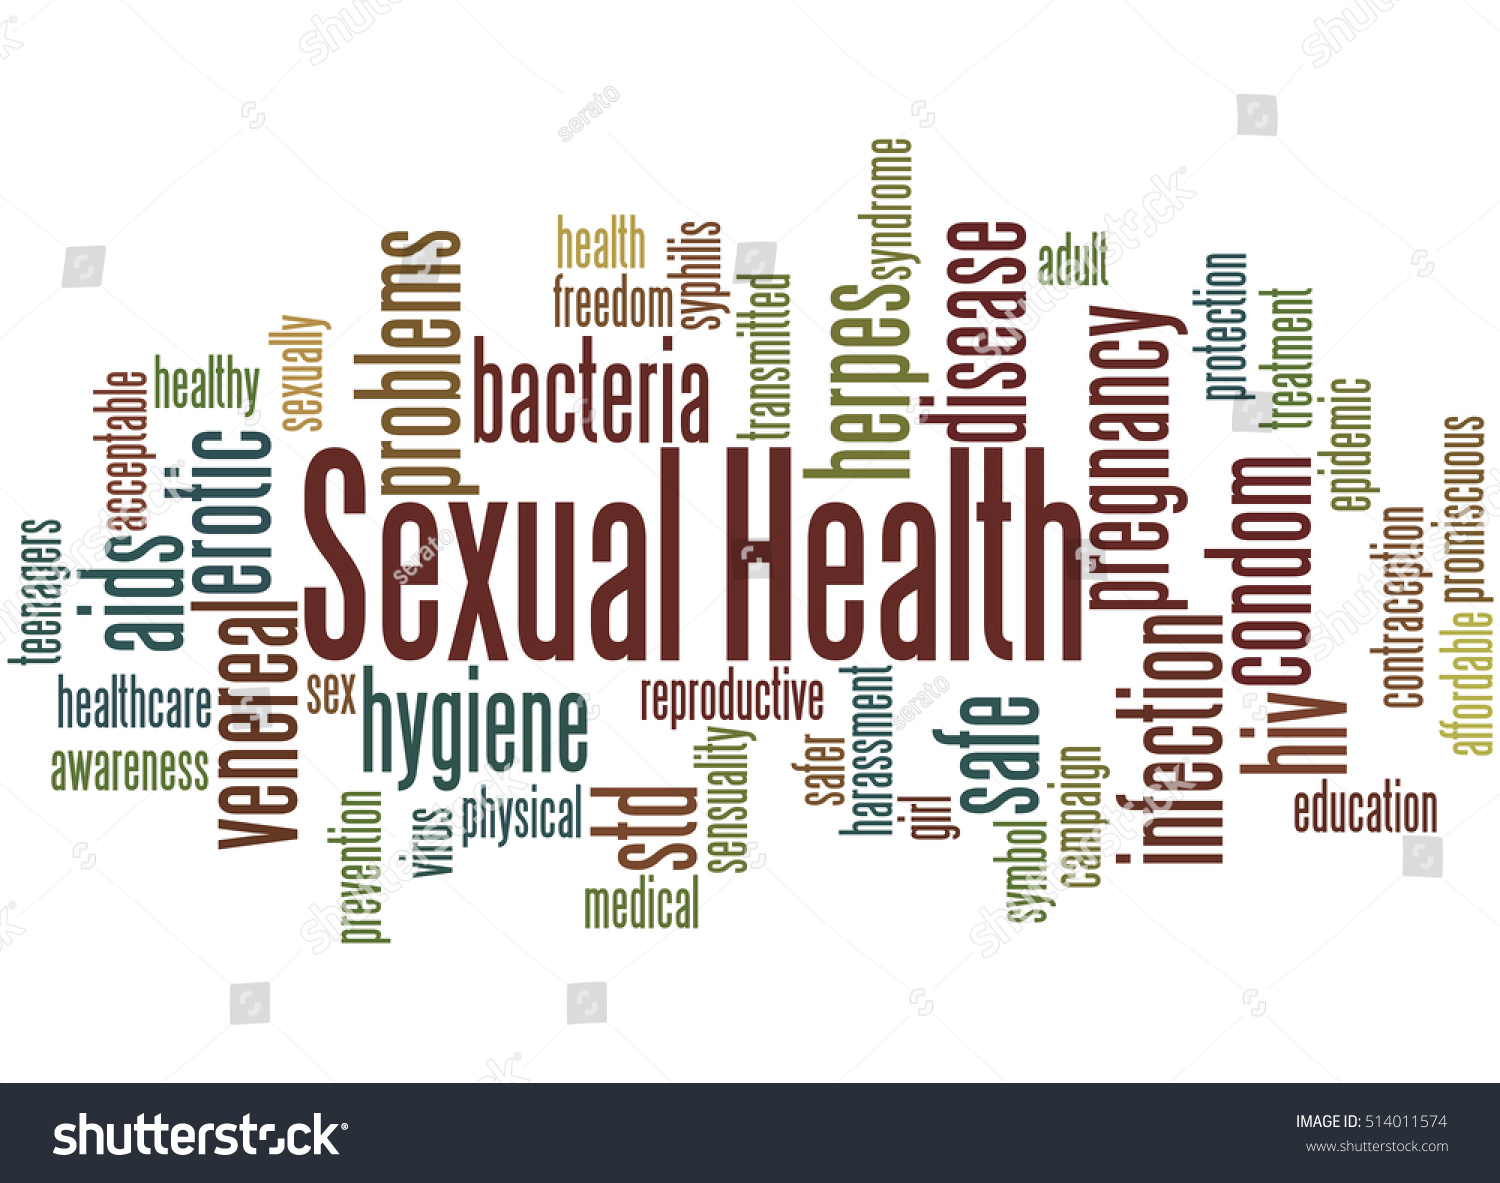 Sexual Health Word Cloud Concept On Stock Illustration 514011574 Shutterstock 3100